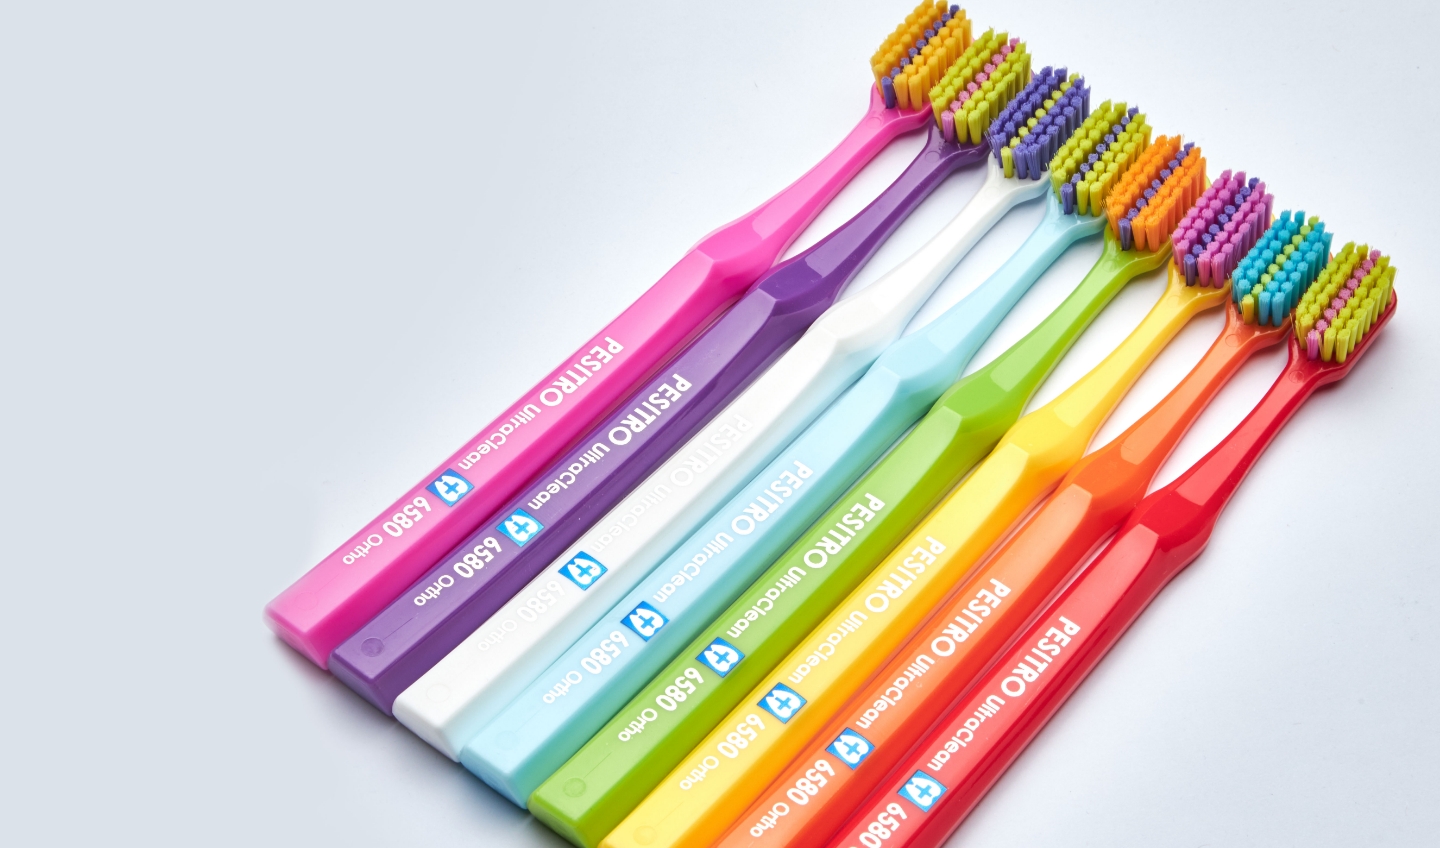 What is the best toothbrush for braces?